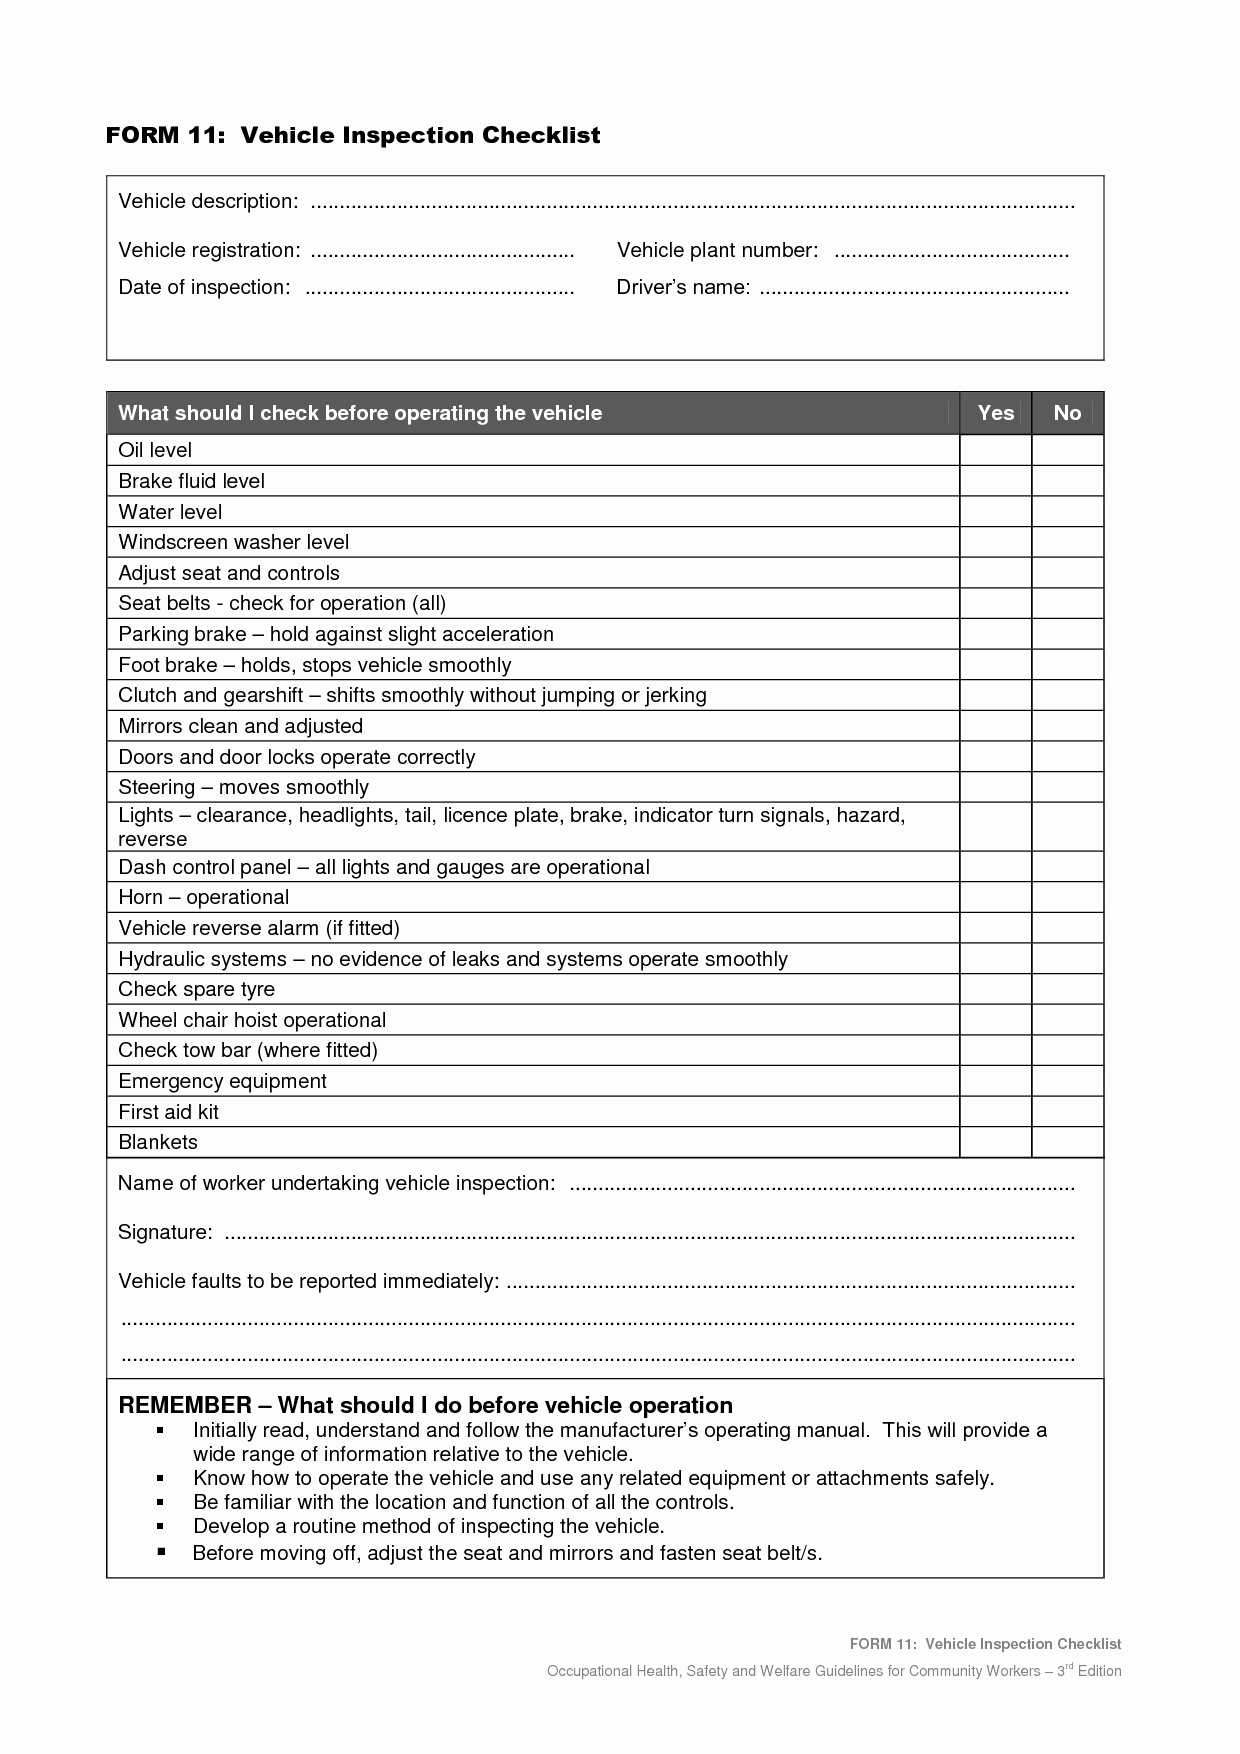 Vehicle Safety Inspection Checklist Template Elegant Vehicle Safety Inspection Checklist form